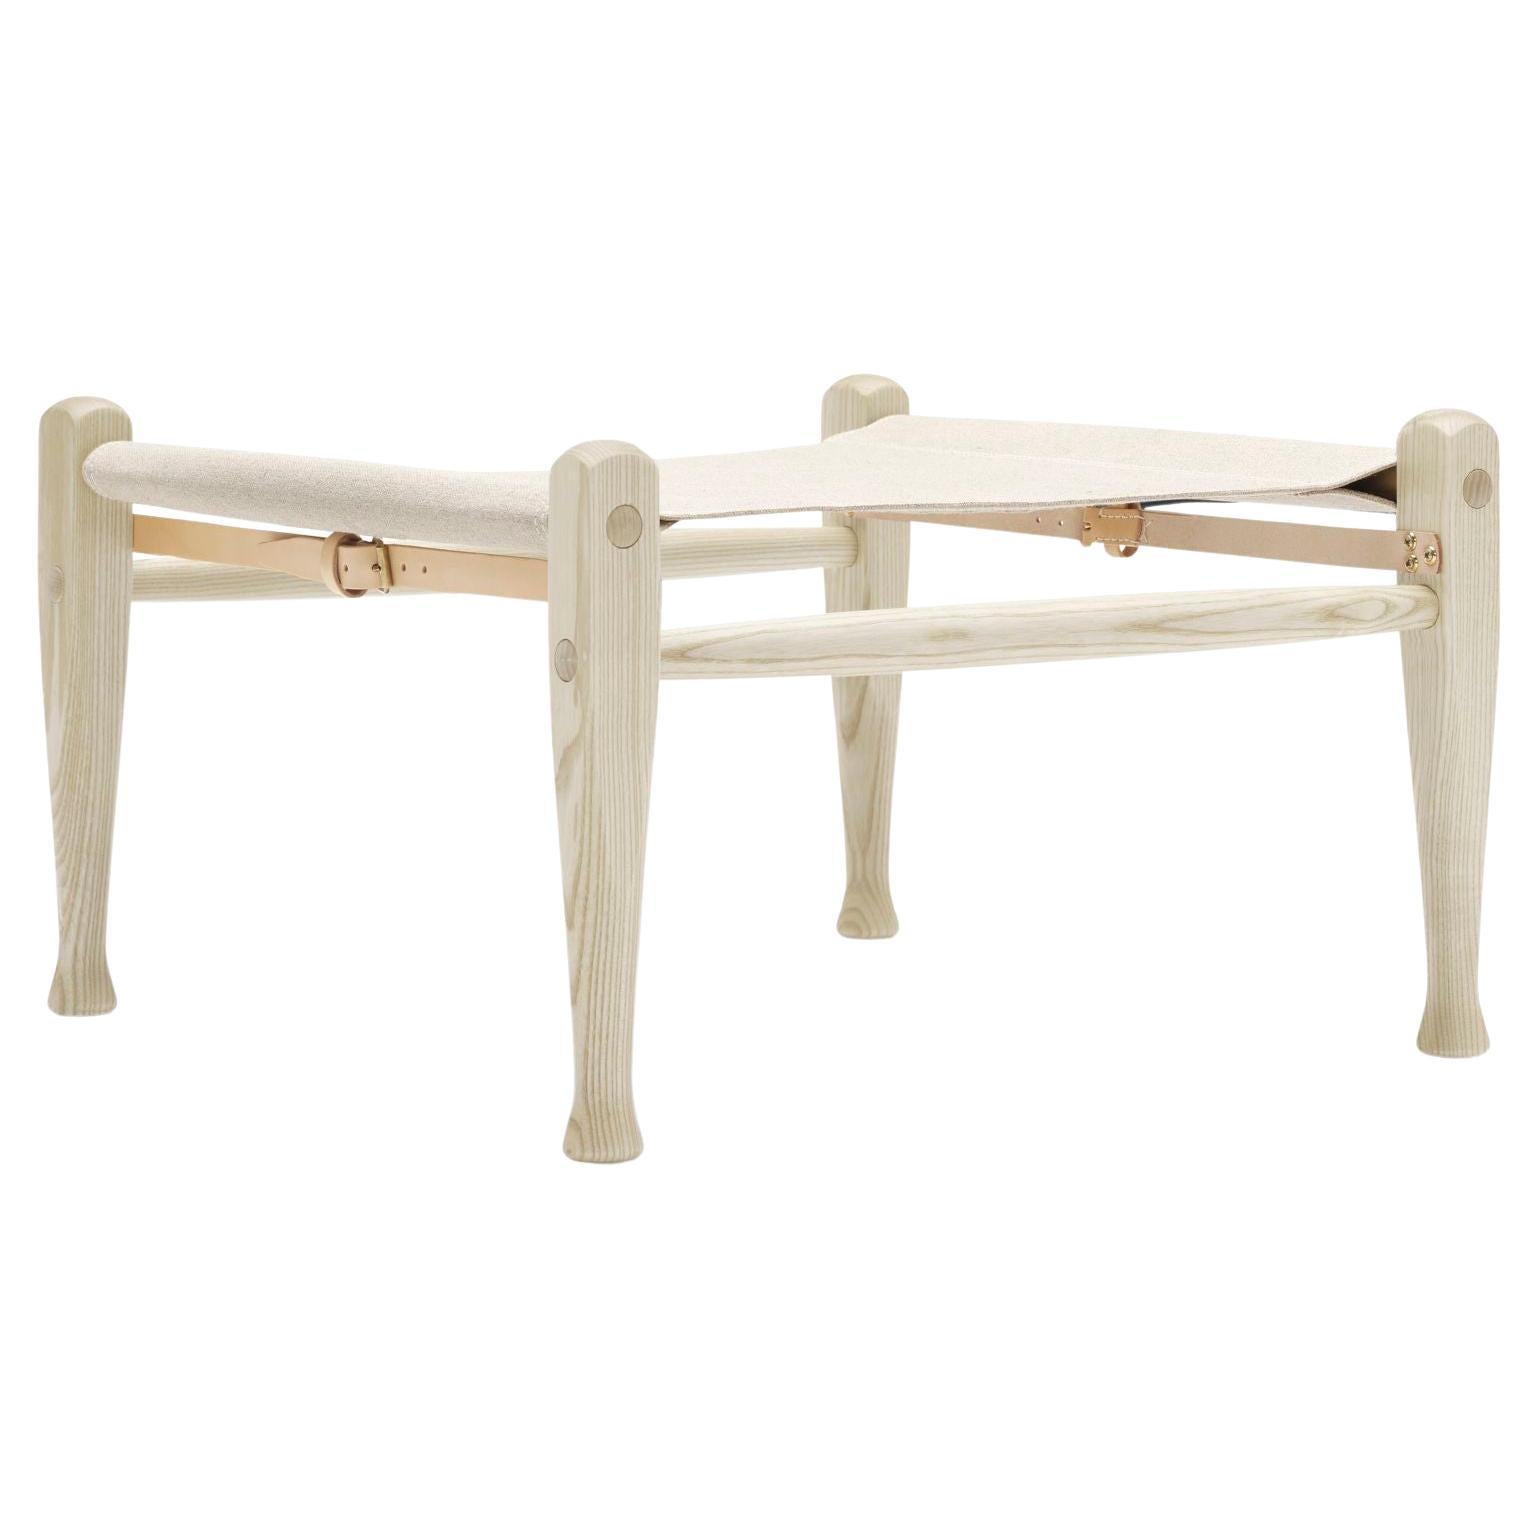 KK97170 Safari Footrest in Ash White Oil with Natural Fabric by Kaare Klint